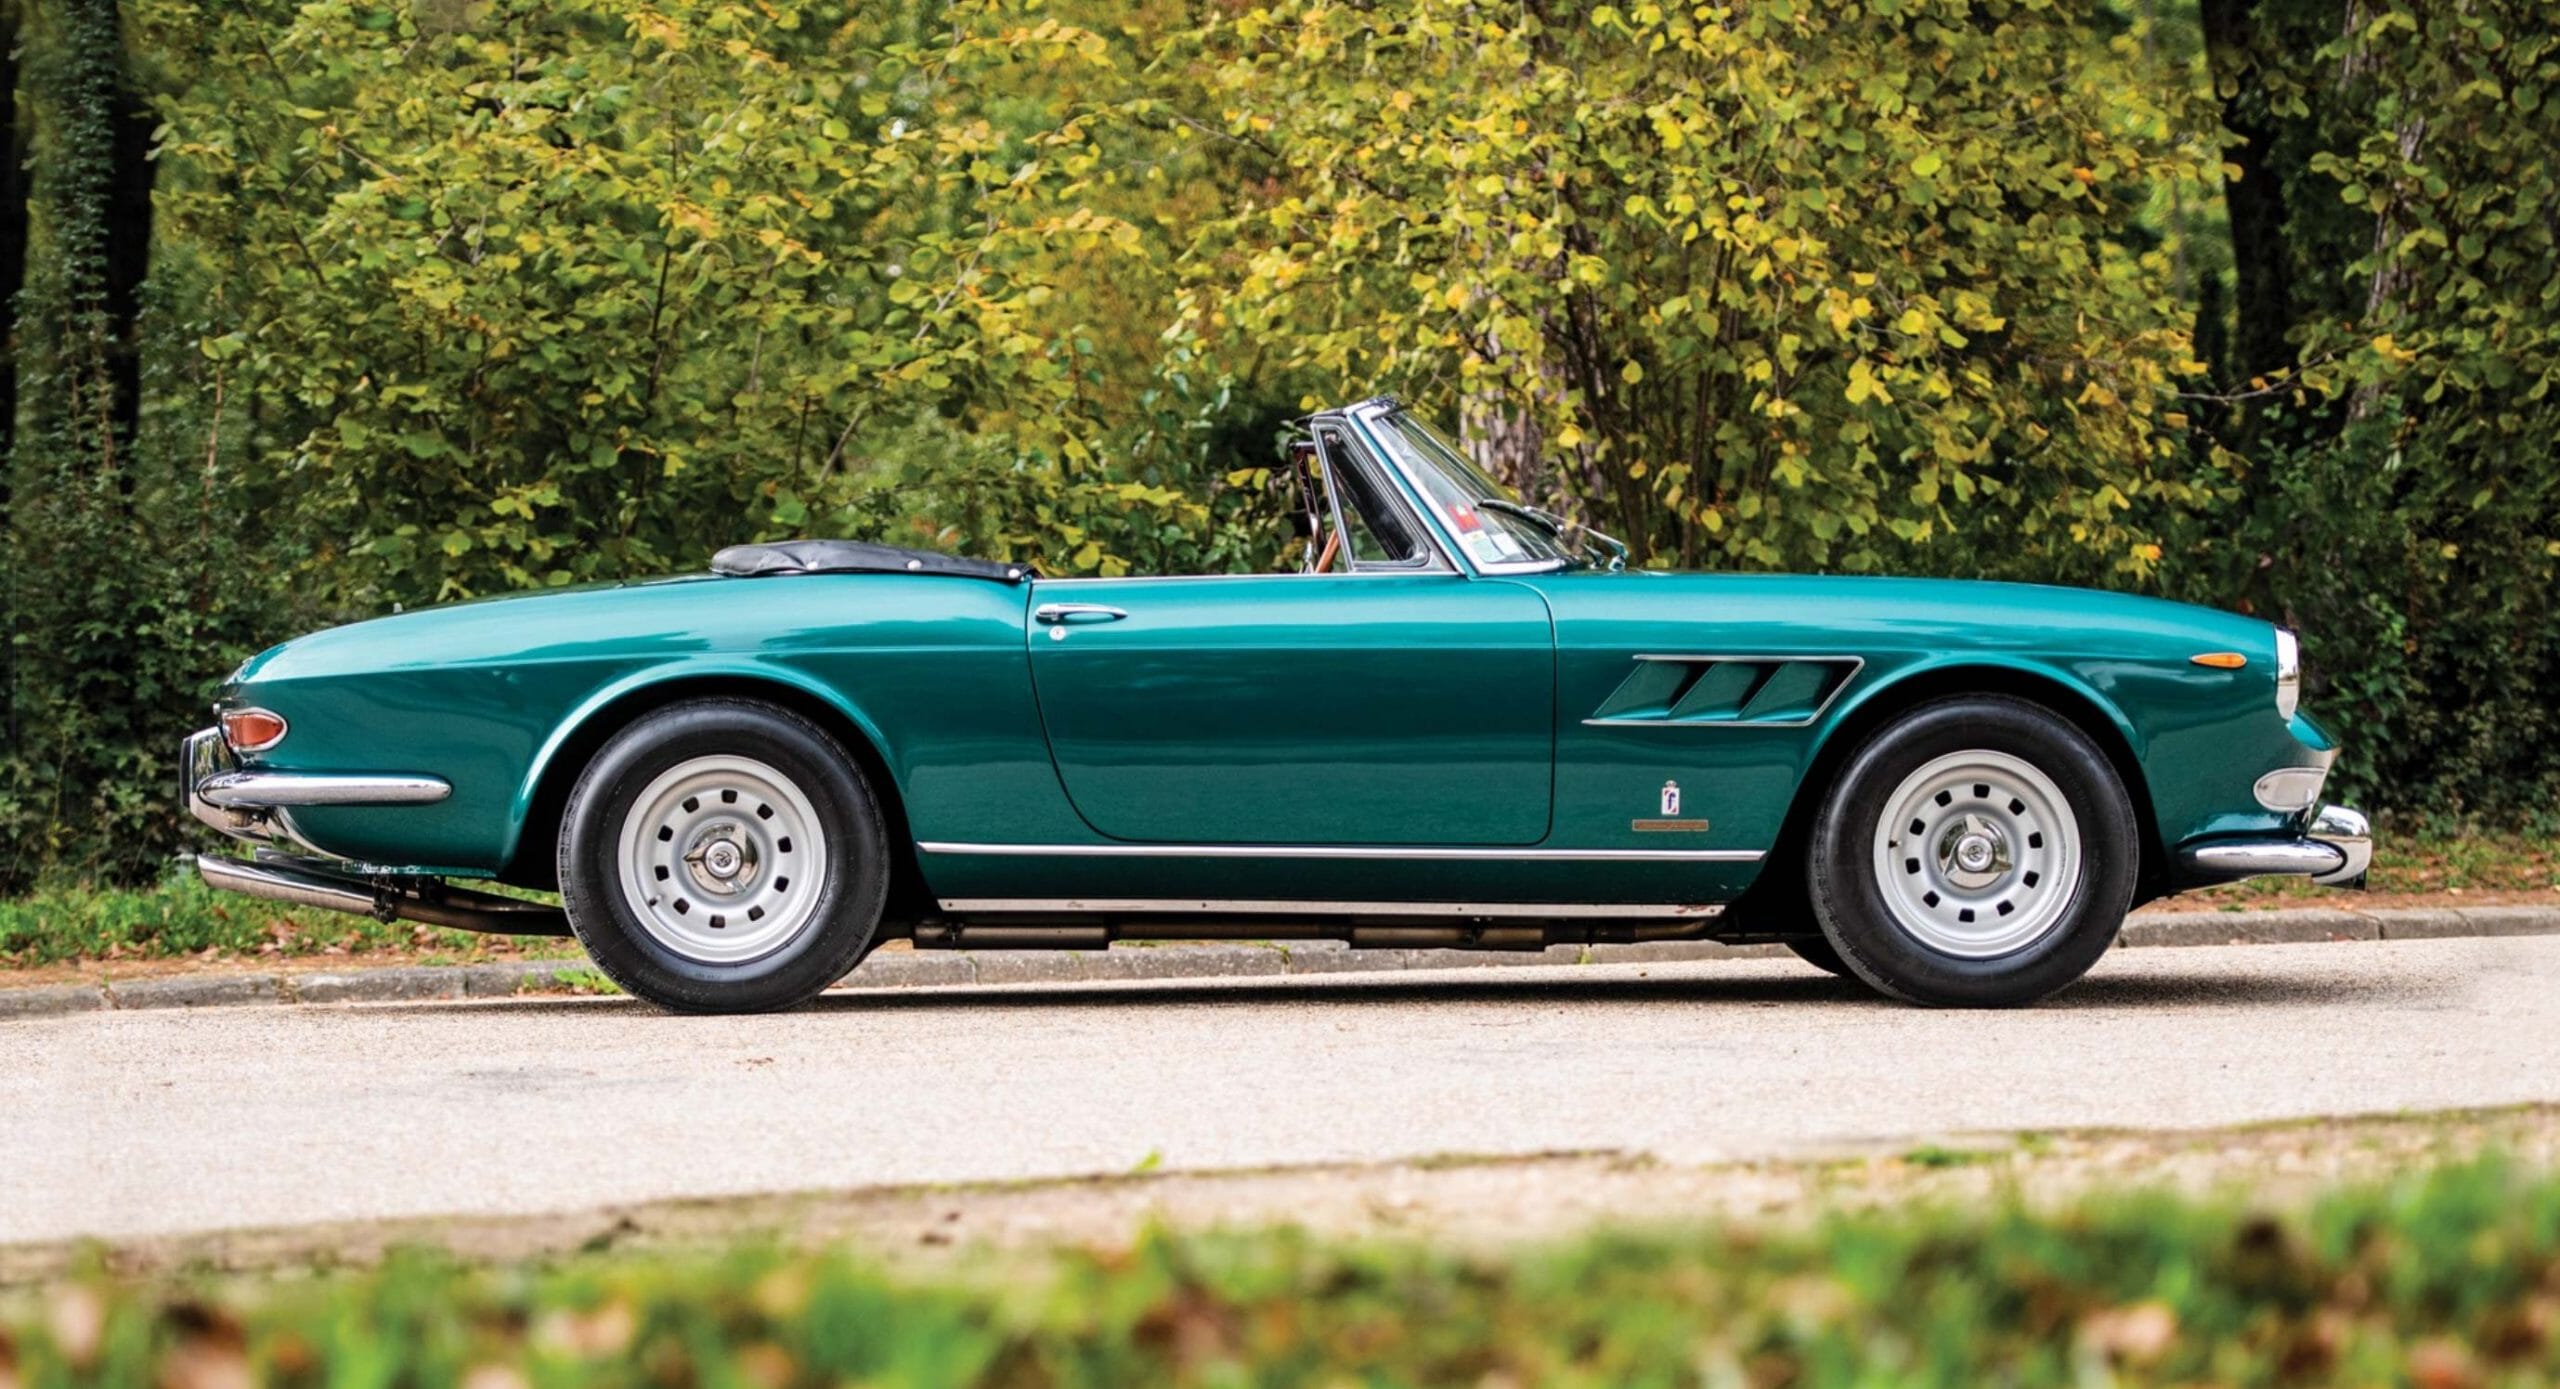 1965 Ferrari 275 GTS: Owned by royalty